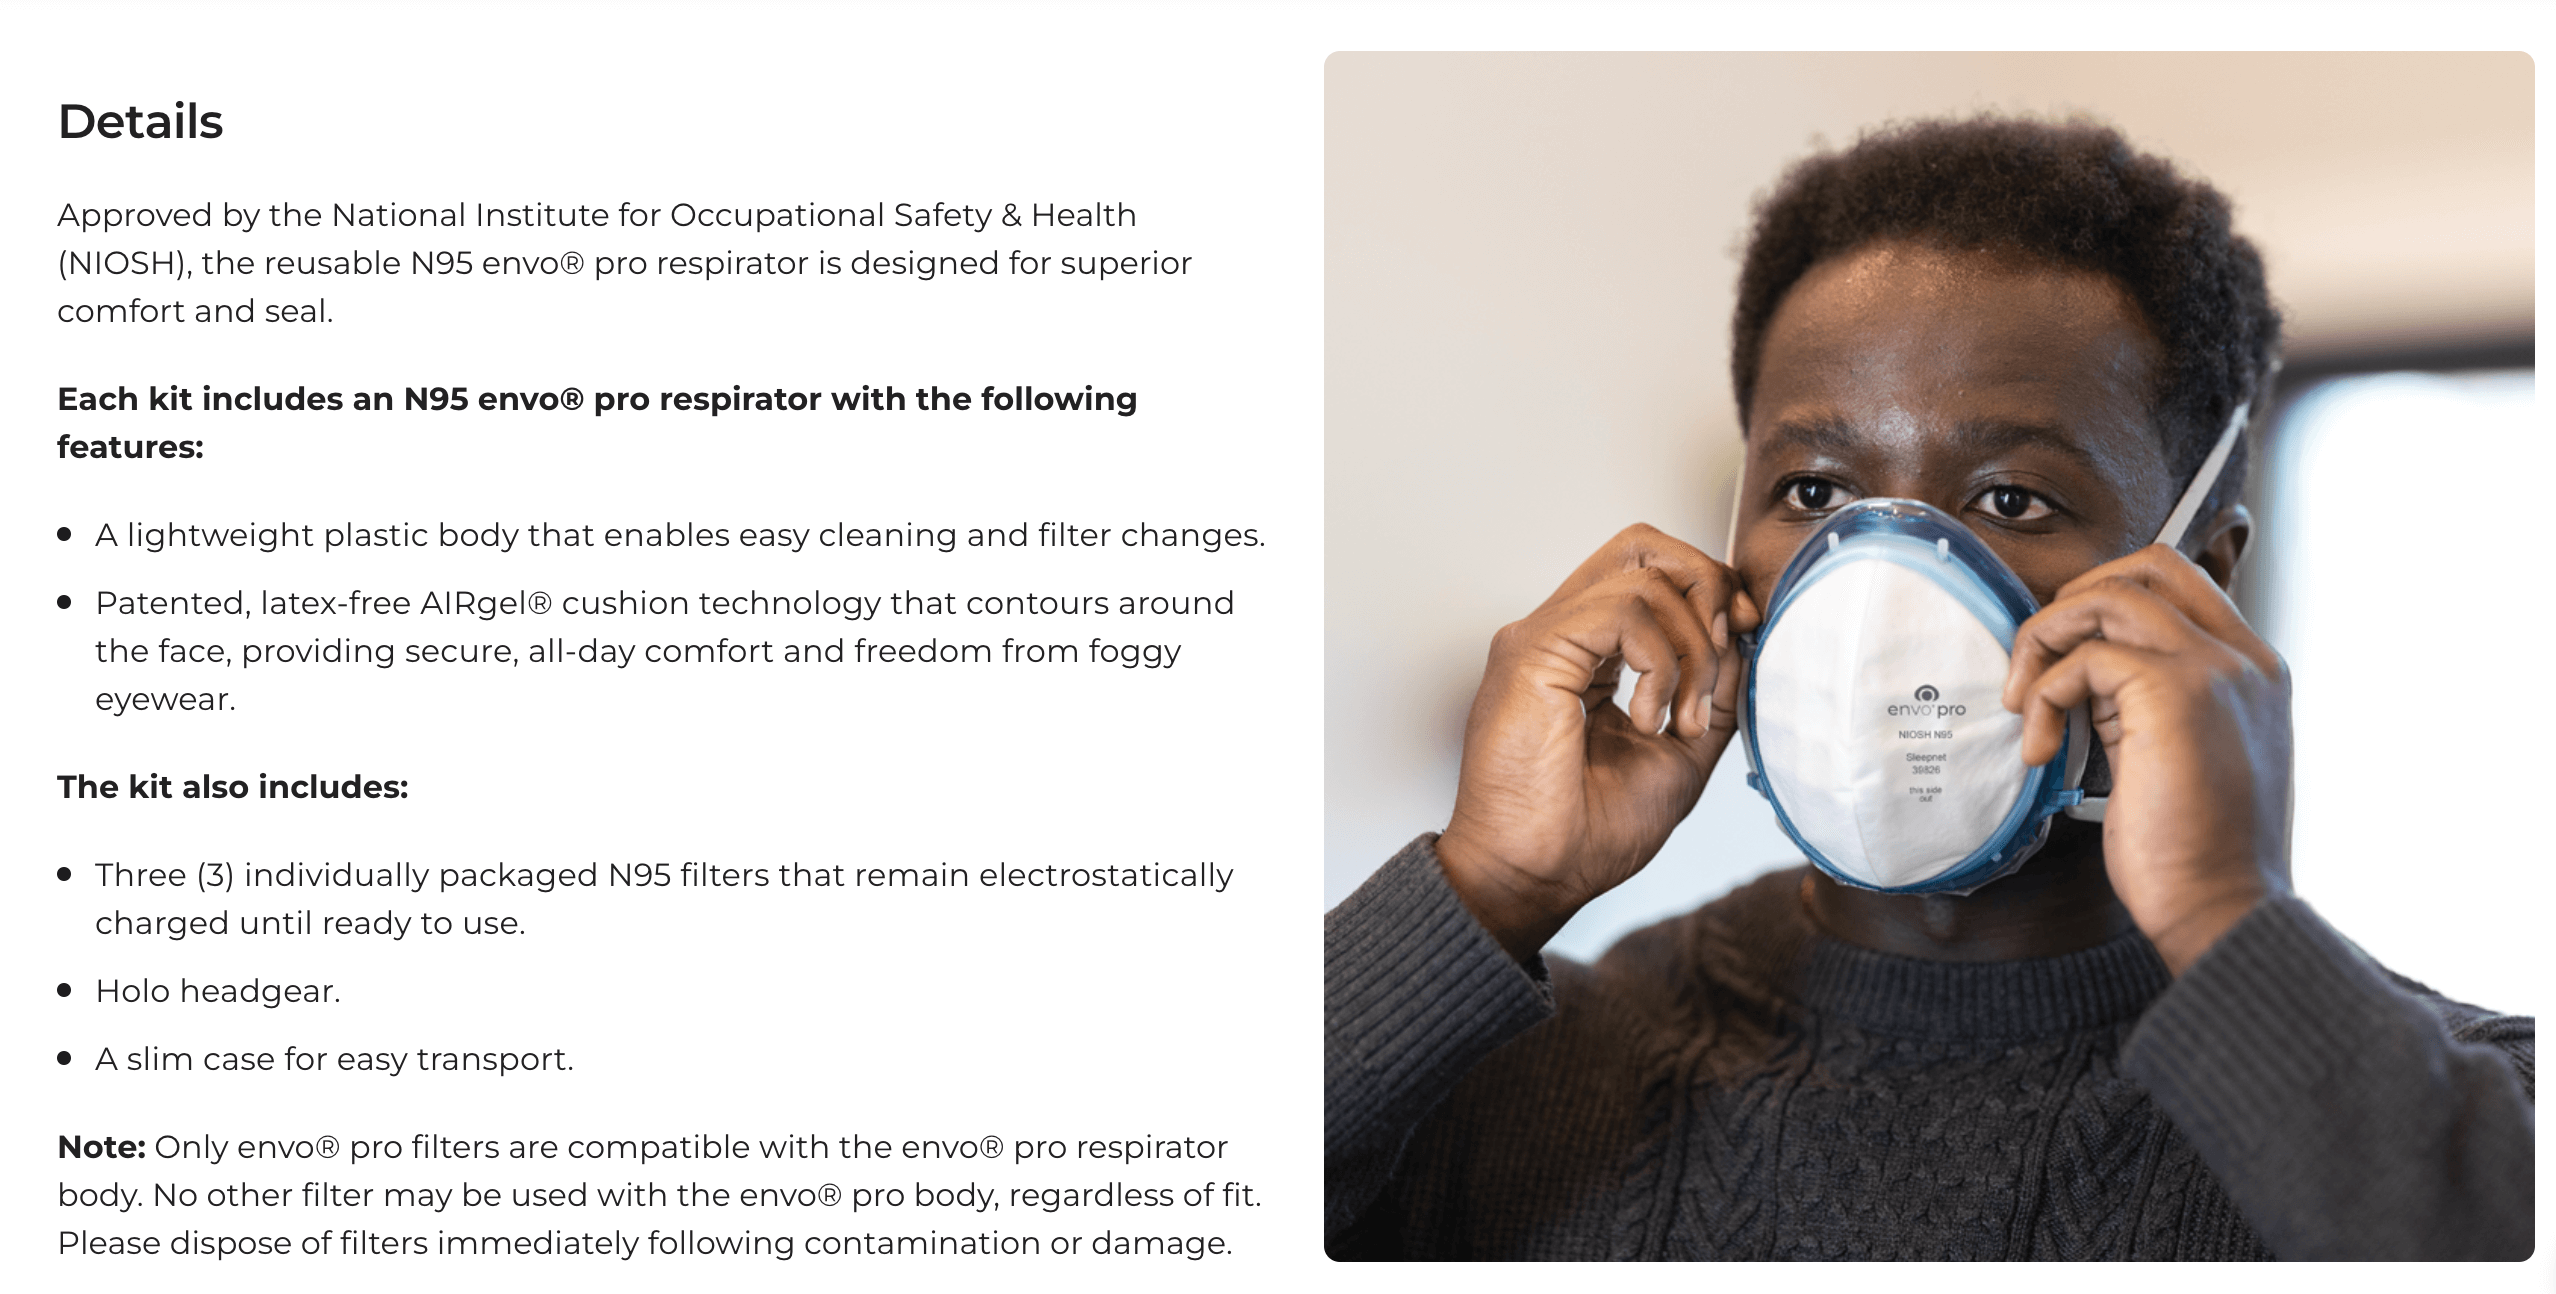 A product detail web page for an N95 respirator, with a photo of a Black man with short curly black hair placing a respirator over his nose and mouth.